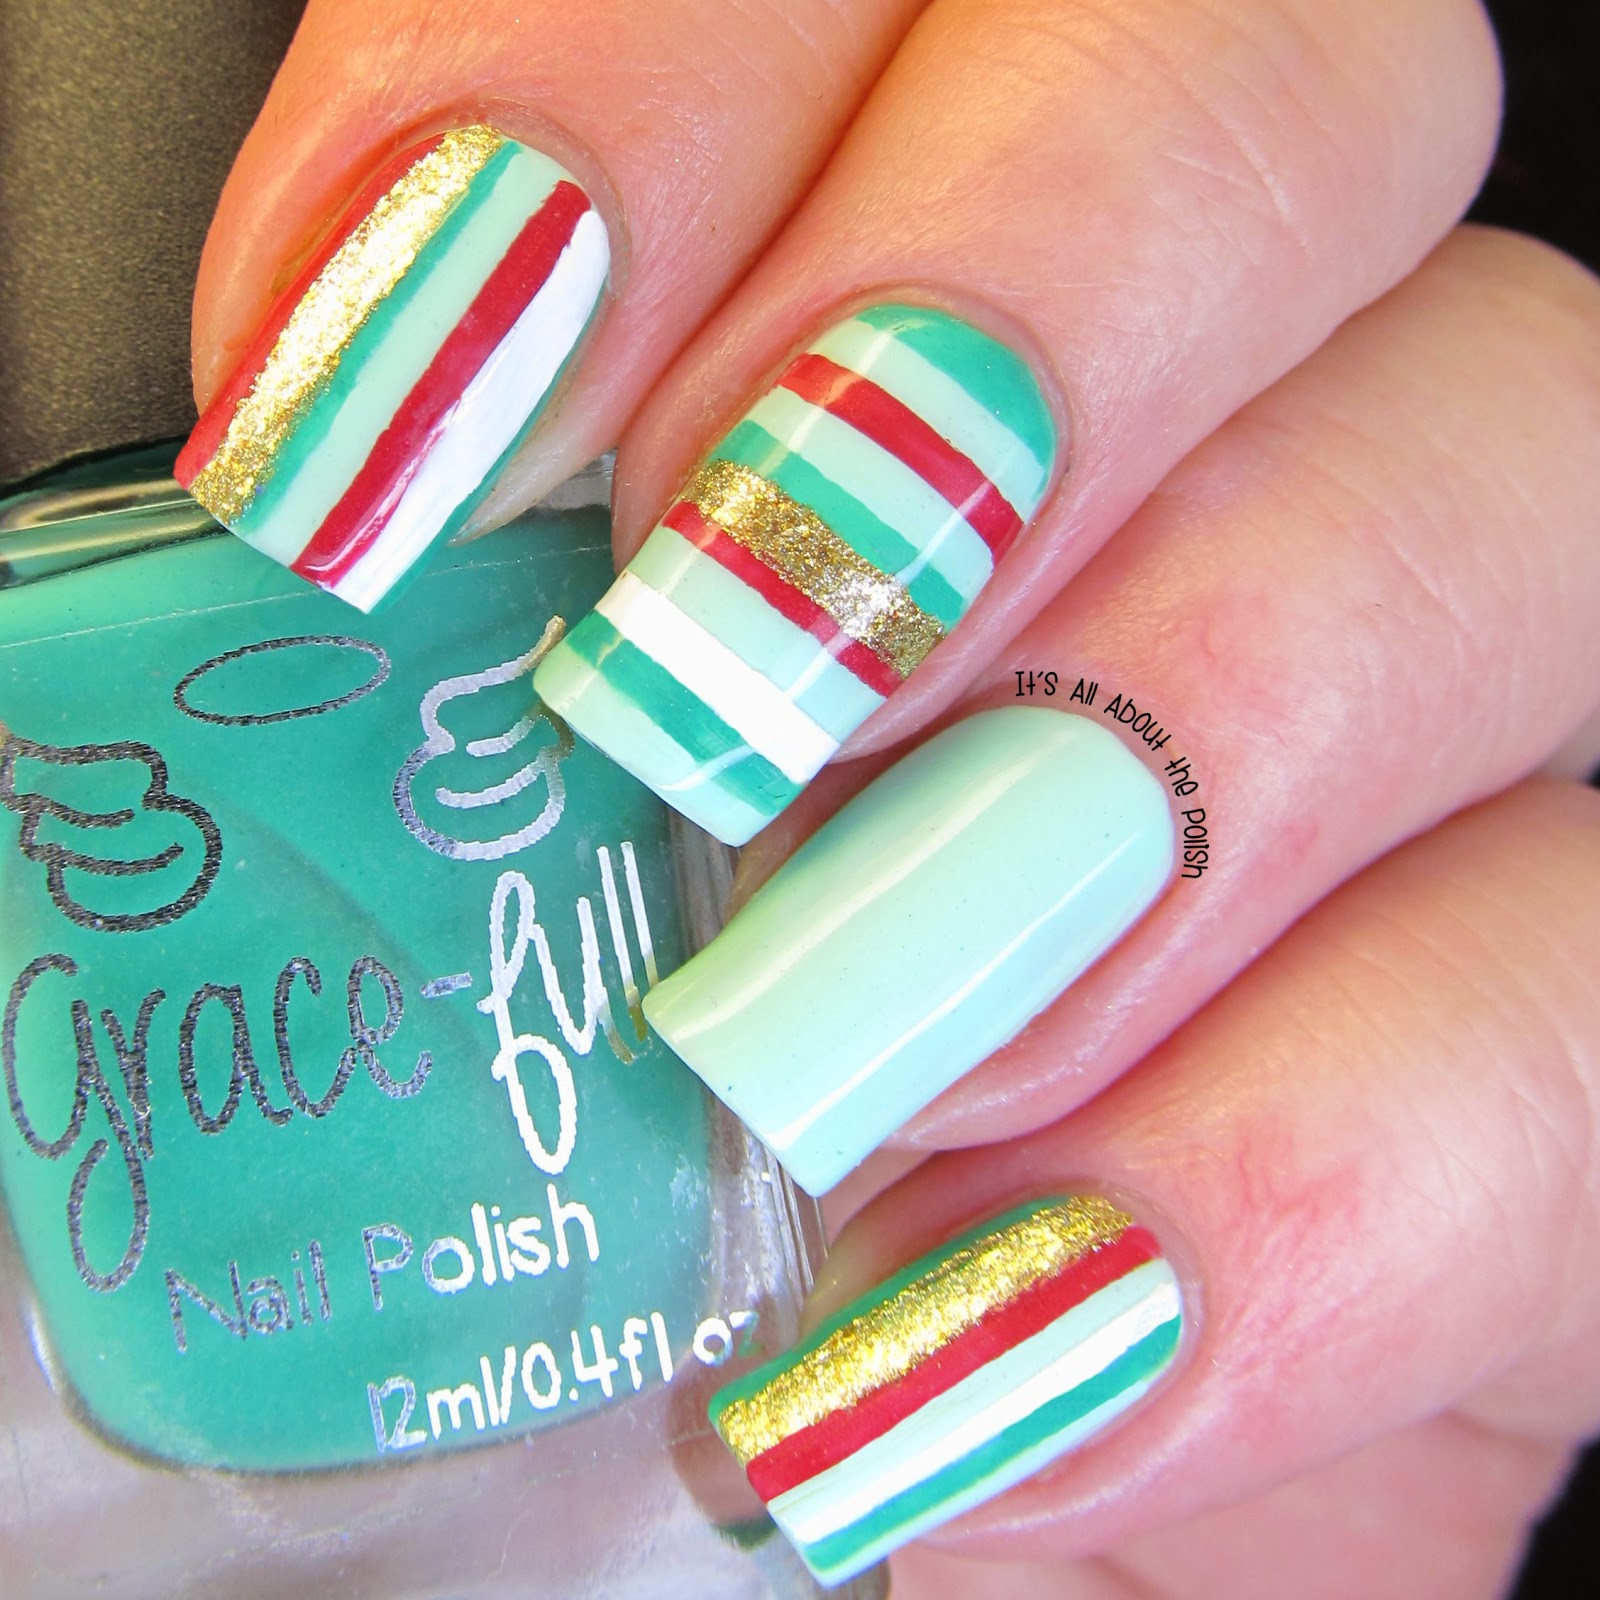 It's all about the polish: Christmas Stripes Nail Art